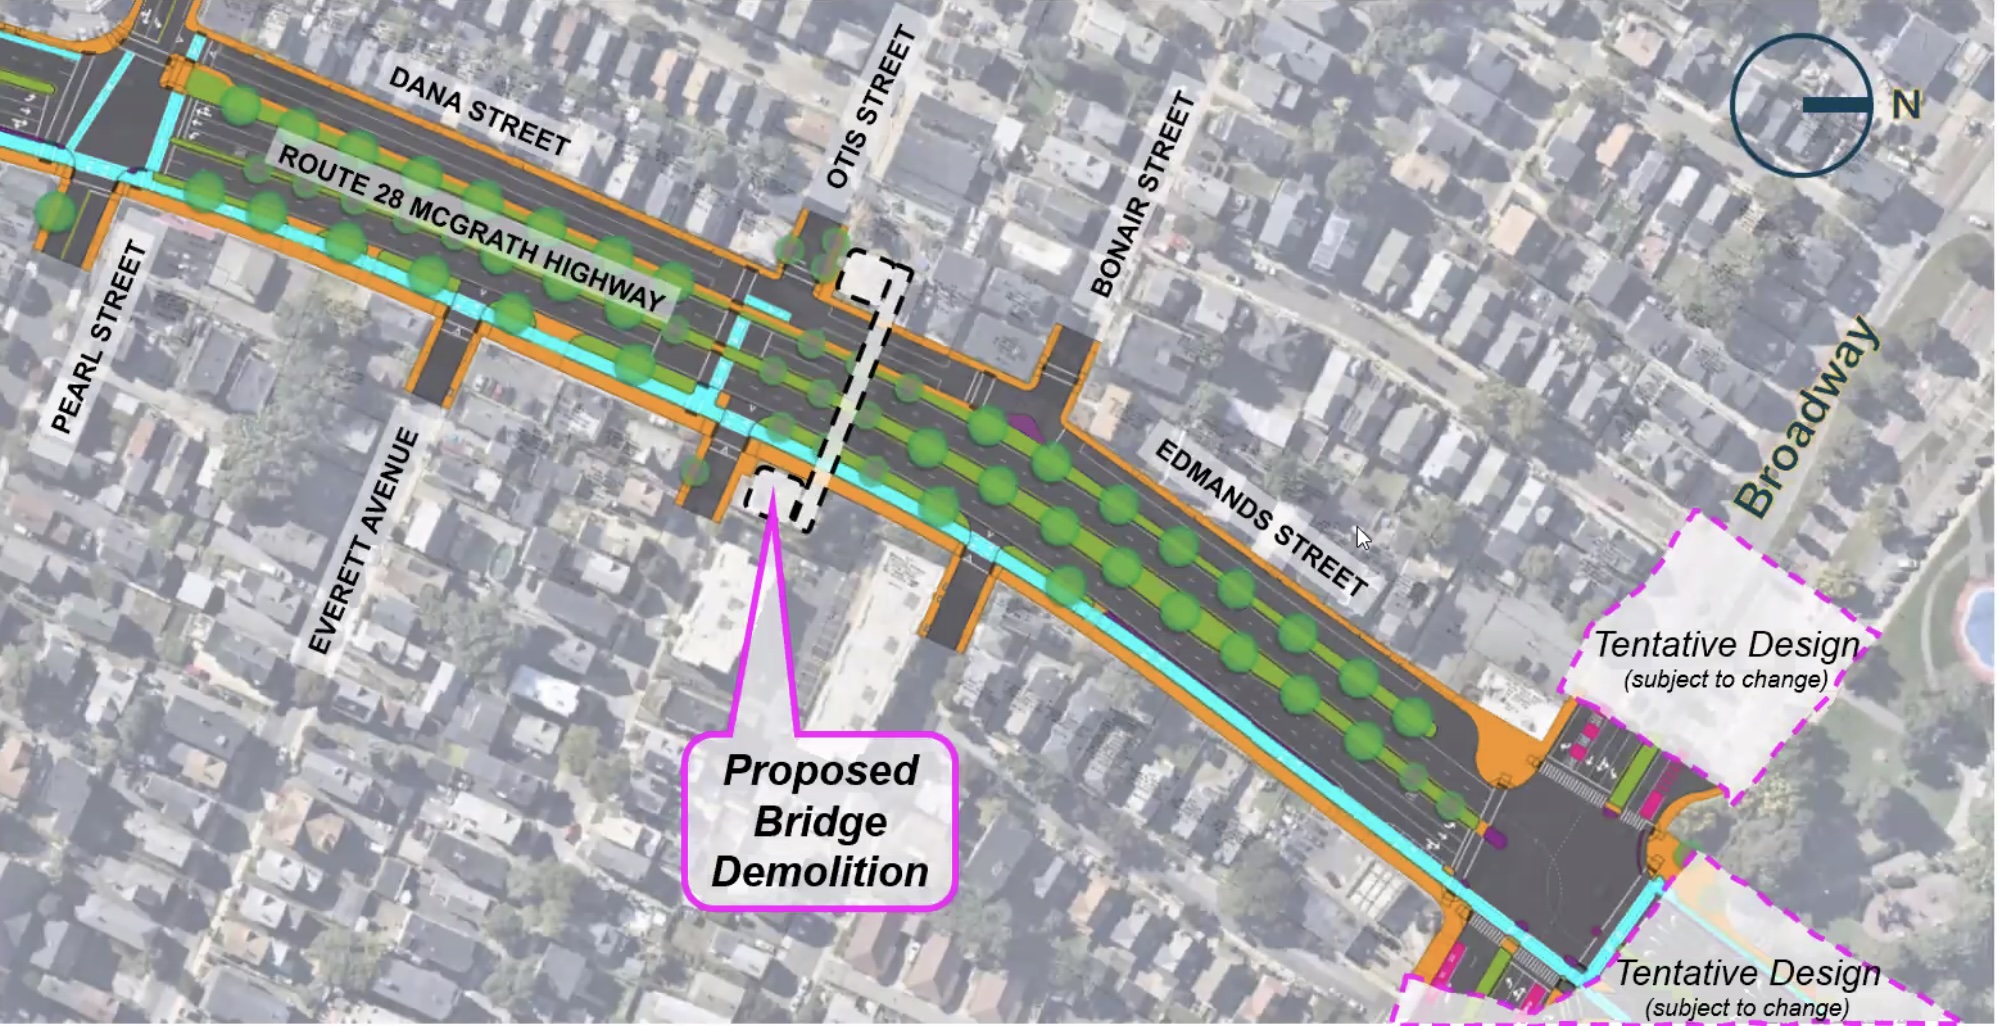 An overhead plan view of the proposed McGrath Boulevard between Pearl Street (in upper left) and Broadway (lower right). The new McGrath runs diagonally from upper left (south) to lower right (north). It features four lanes for motor vehicles, a two-way bike path on the eastern side (shown as a blue stripe) and wide sidewalks (in orange. Between Broadway and Pearl Street, parallel local-access streets with on-street parking, labelled Edmands St. and Dana St. provide local access to adjacent homes. Rows of trees line either side of McGrath and a wide median strip in the middle. At Otis Street, a dashed line represents the planned demolition of the existing pedestrian bridge,which would be replaced with at-grade crosswalks across the narrowed roadway.